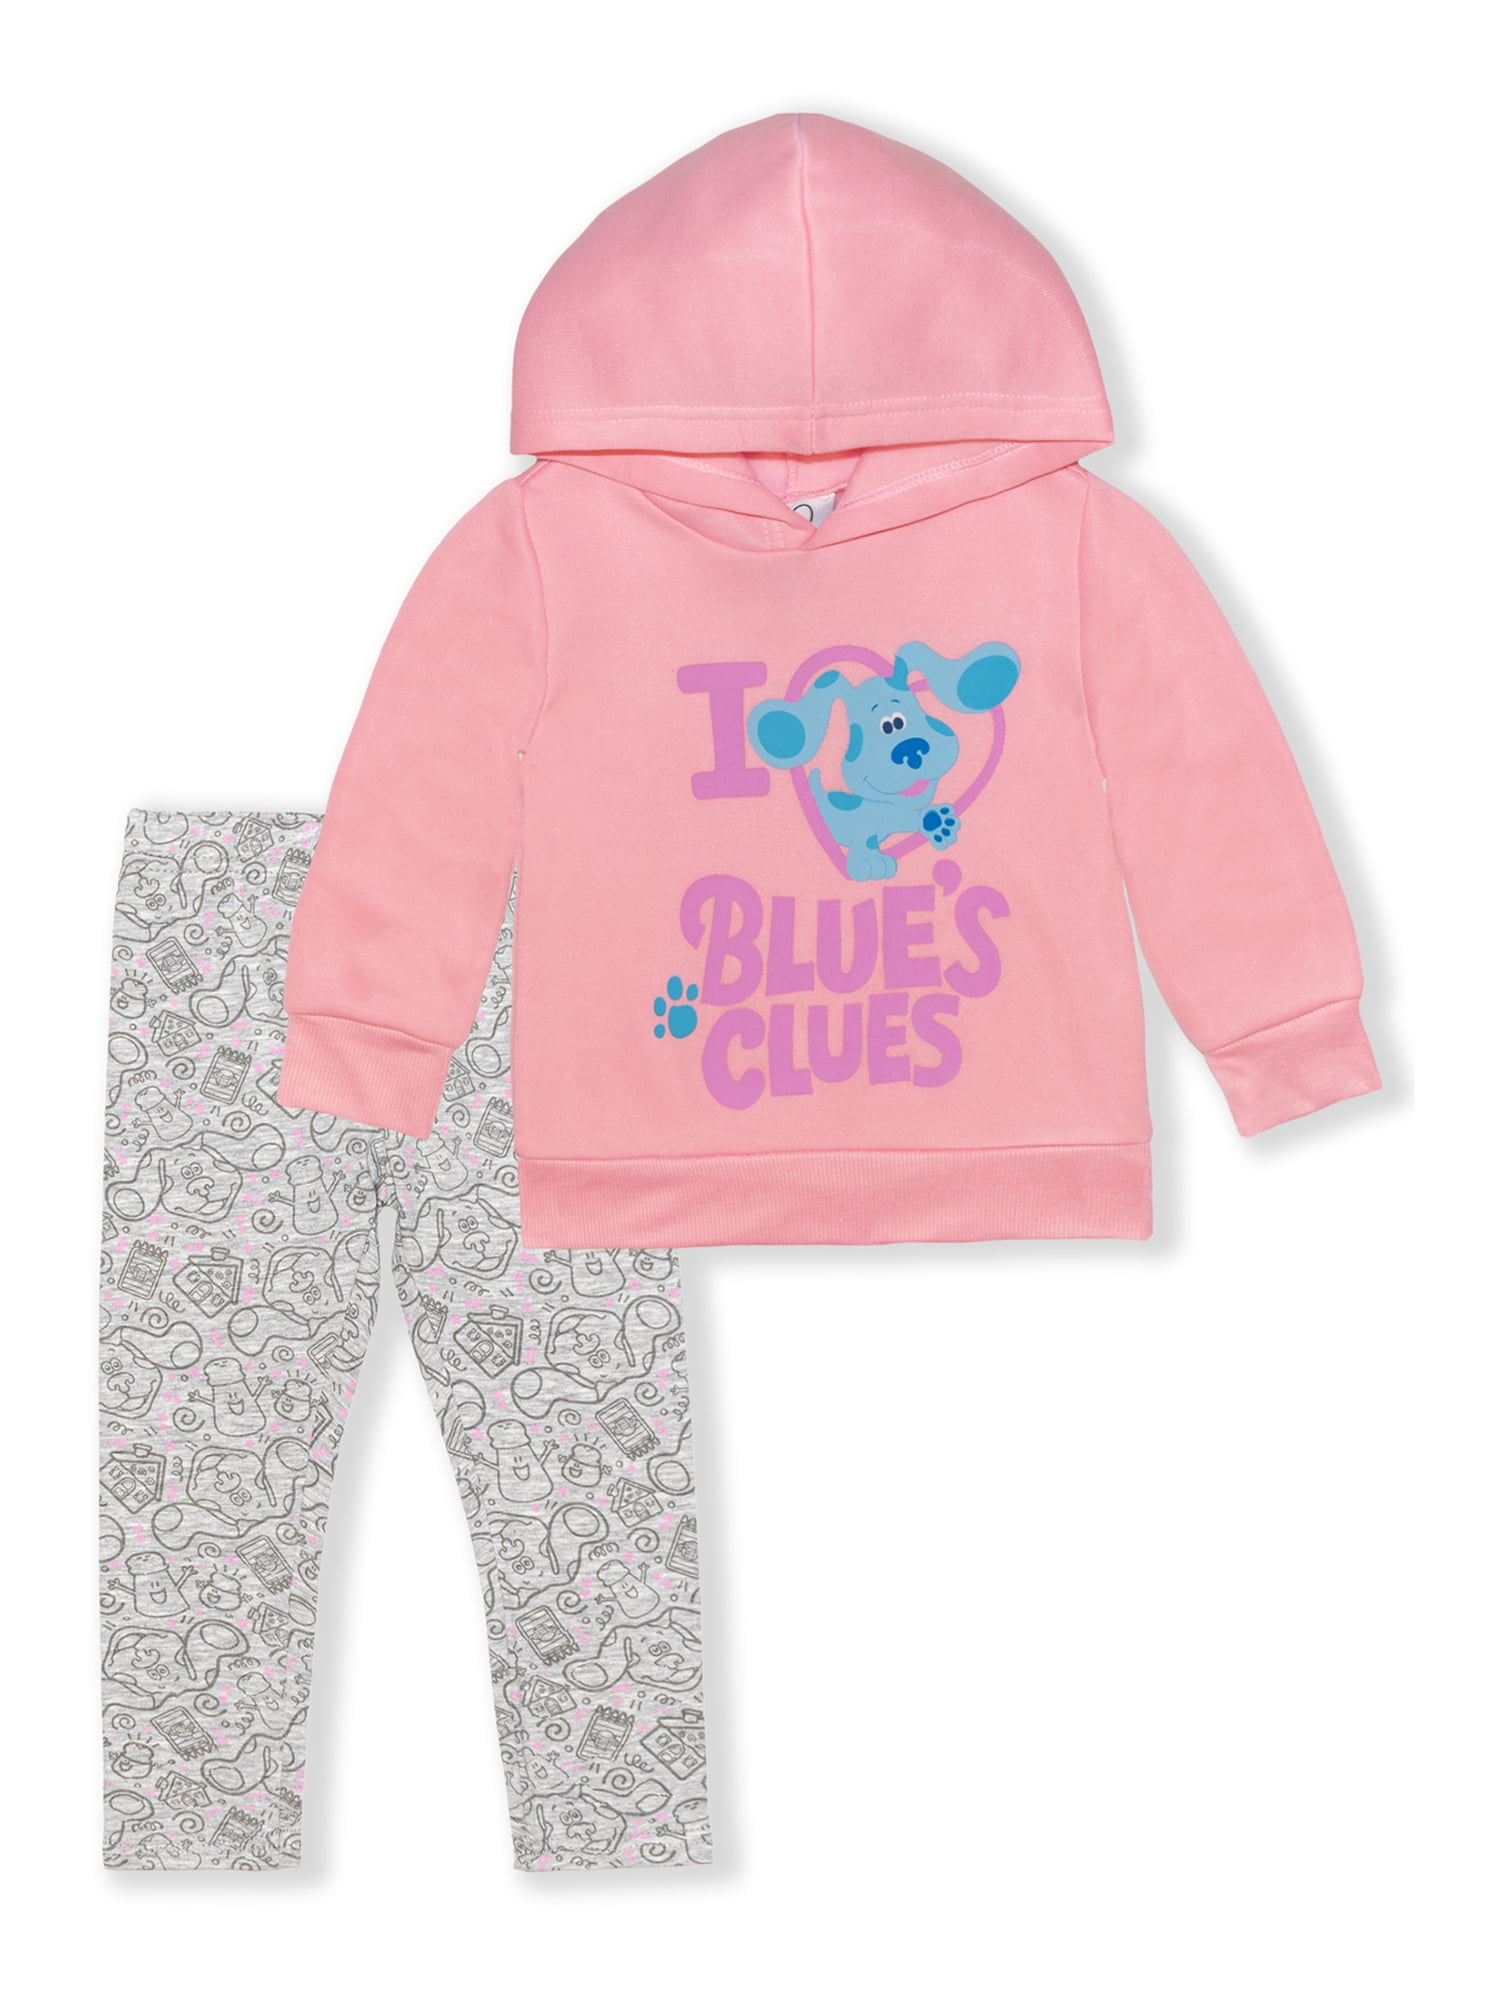 Toddler Unisex 2PC Outfit Sets Sport Style Cat Pullover Hoodie Size 1-4 YRS 